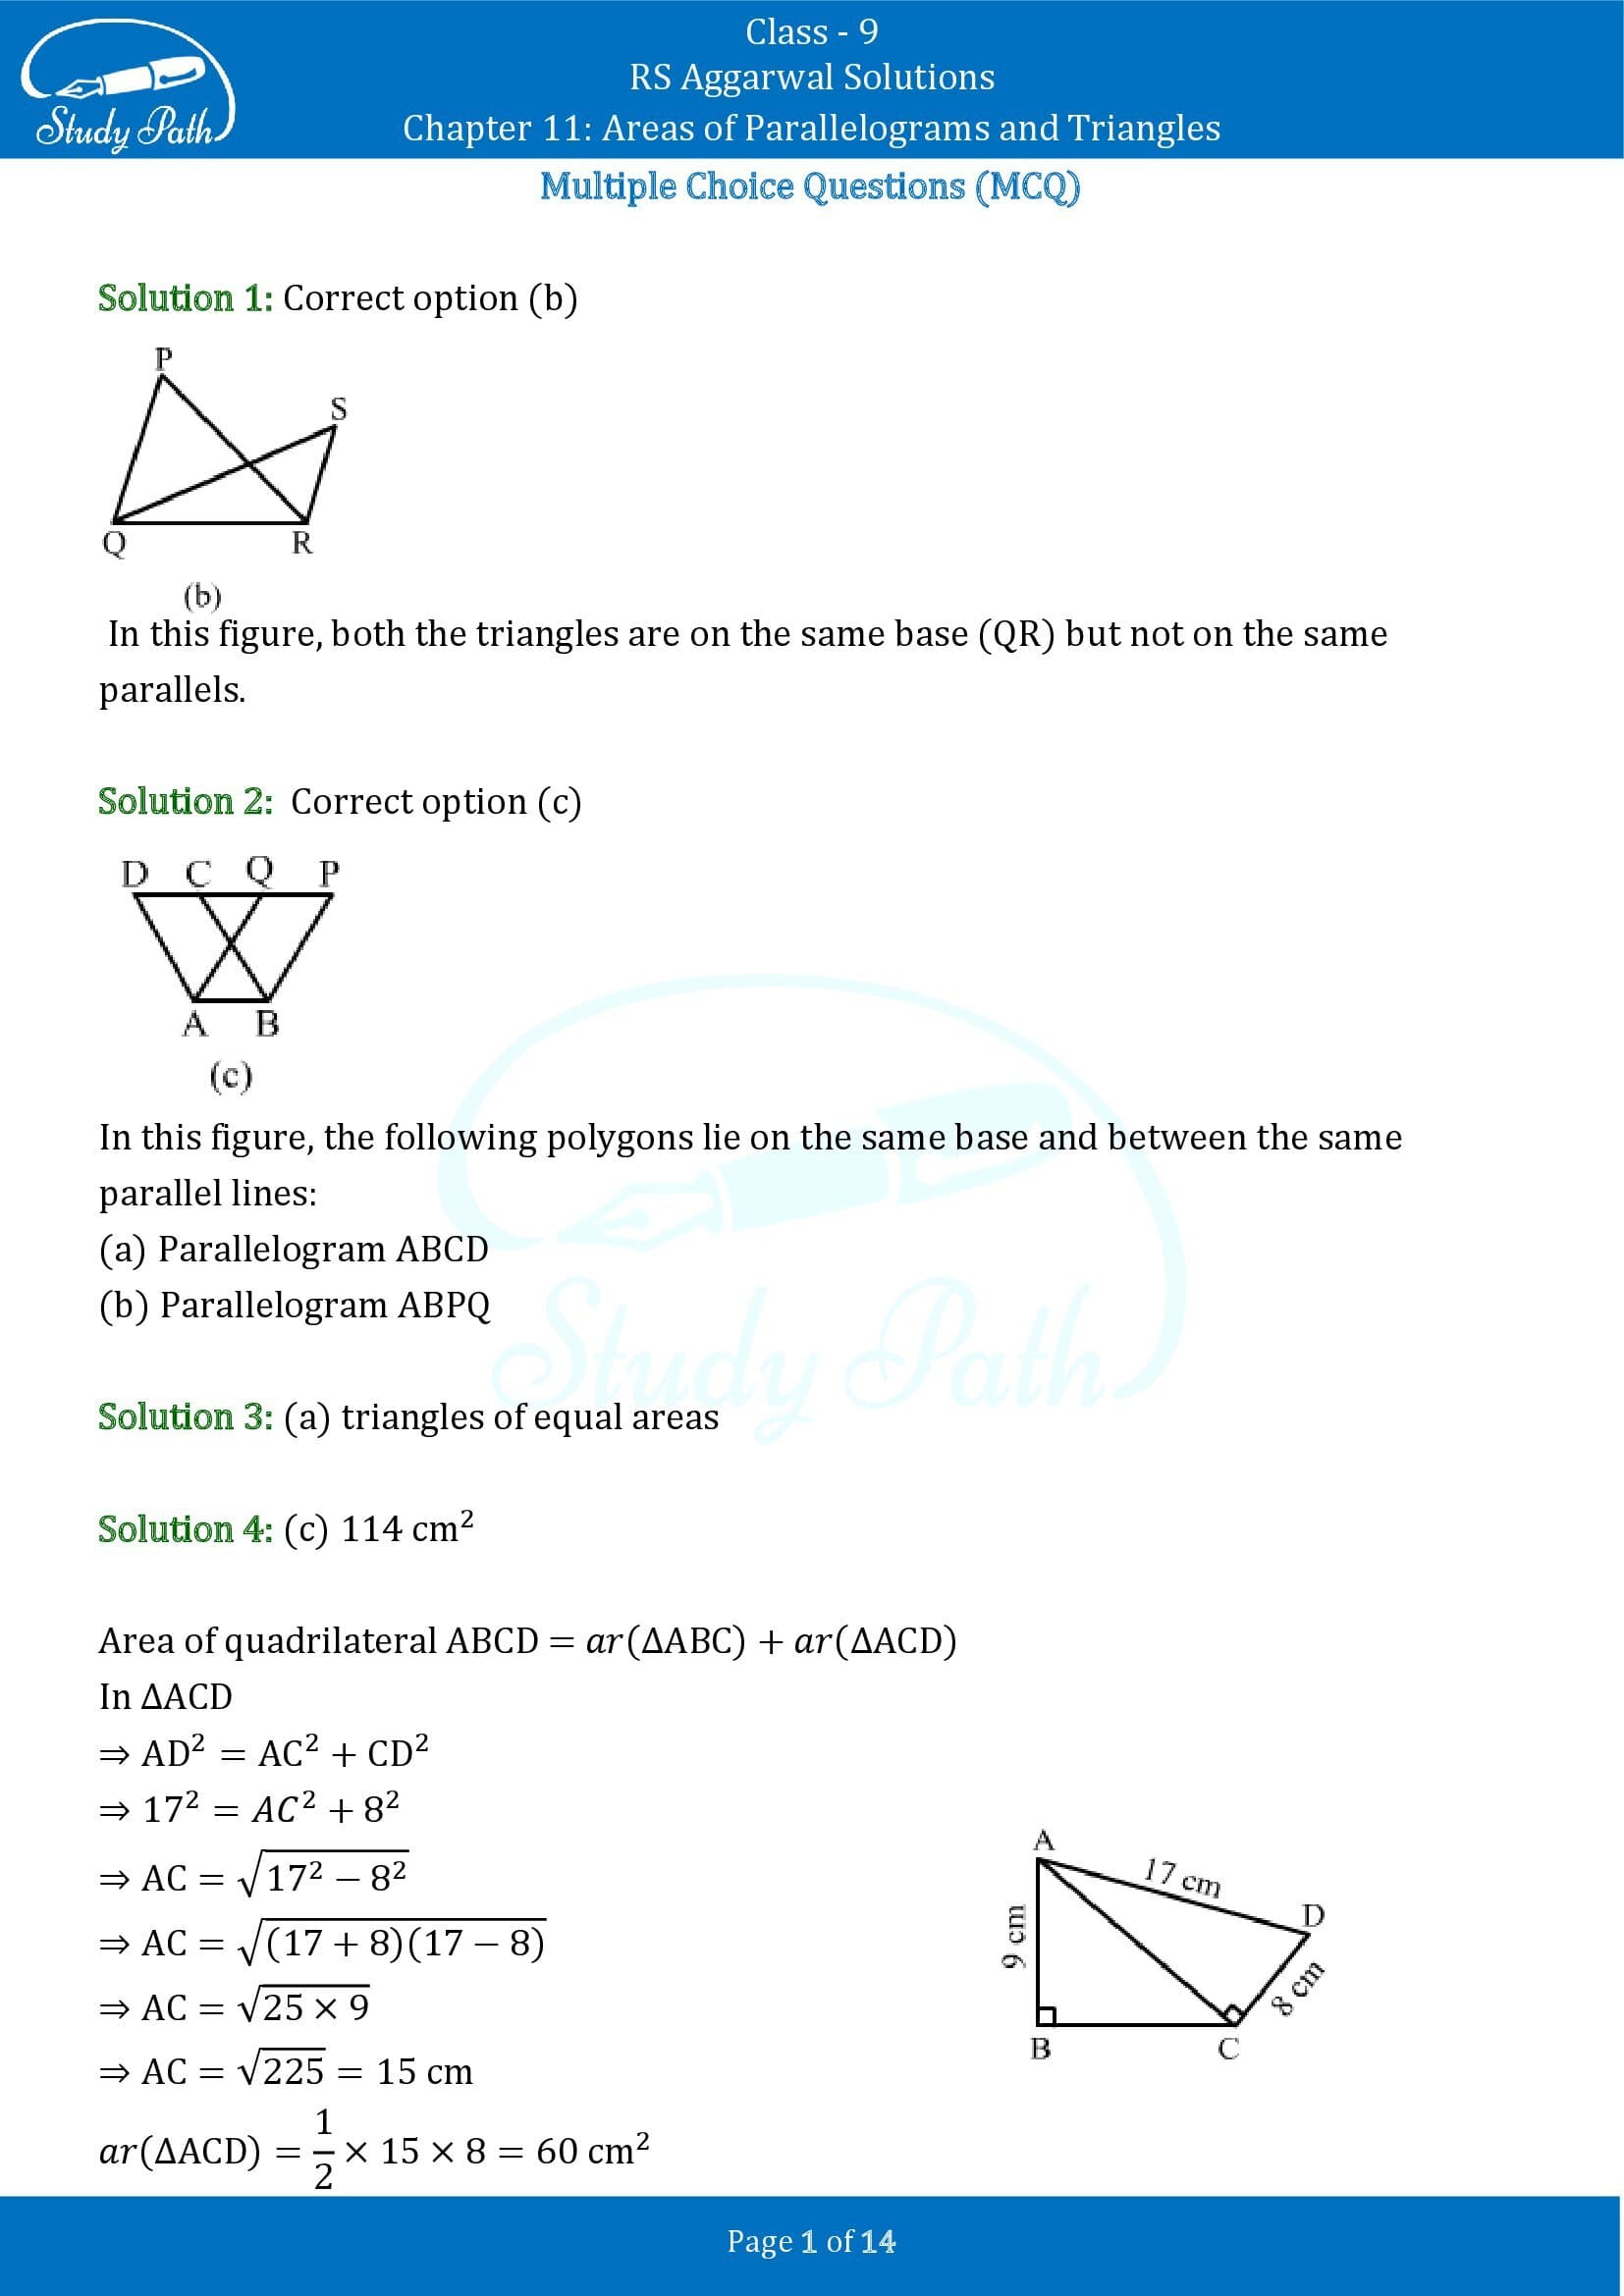 RS Aggarwal Solutions Class 9 Chapter 11 Areas of Parallelograms and Triangles Multiple Choice Questions MCQs 00001